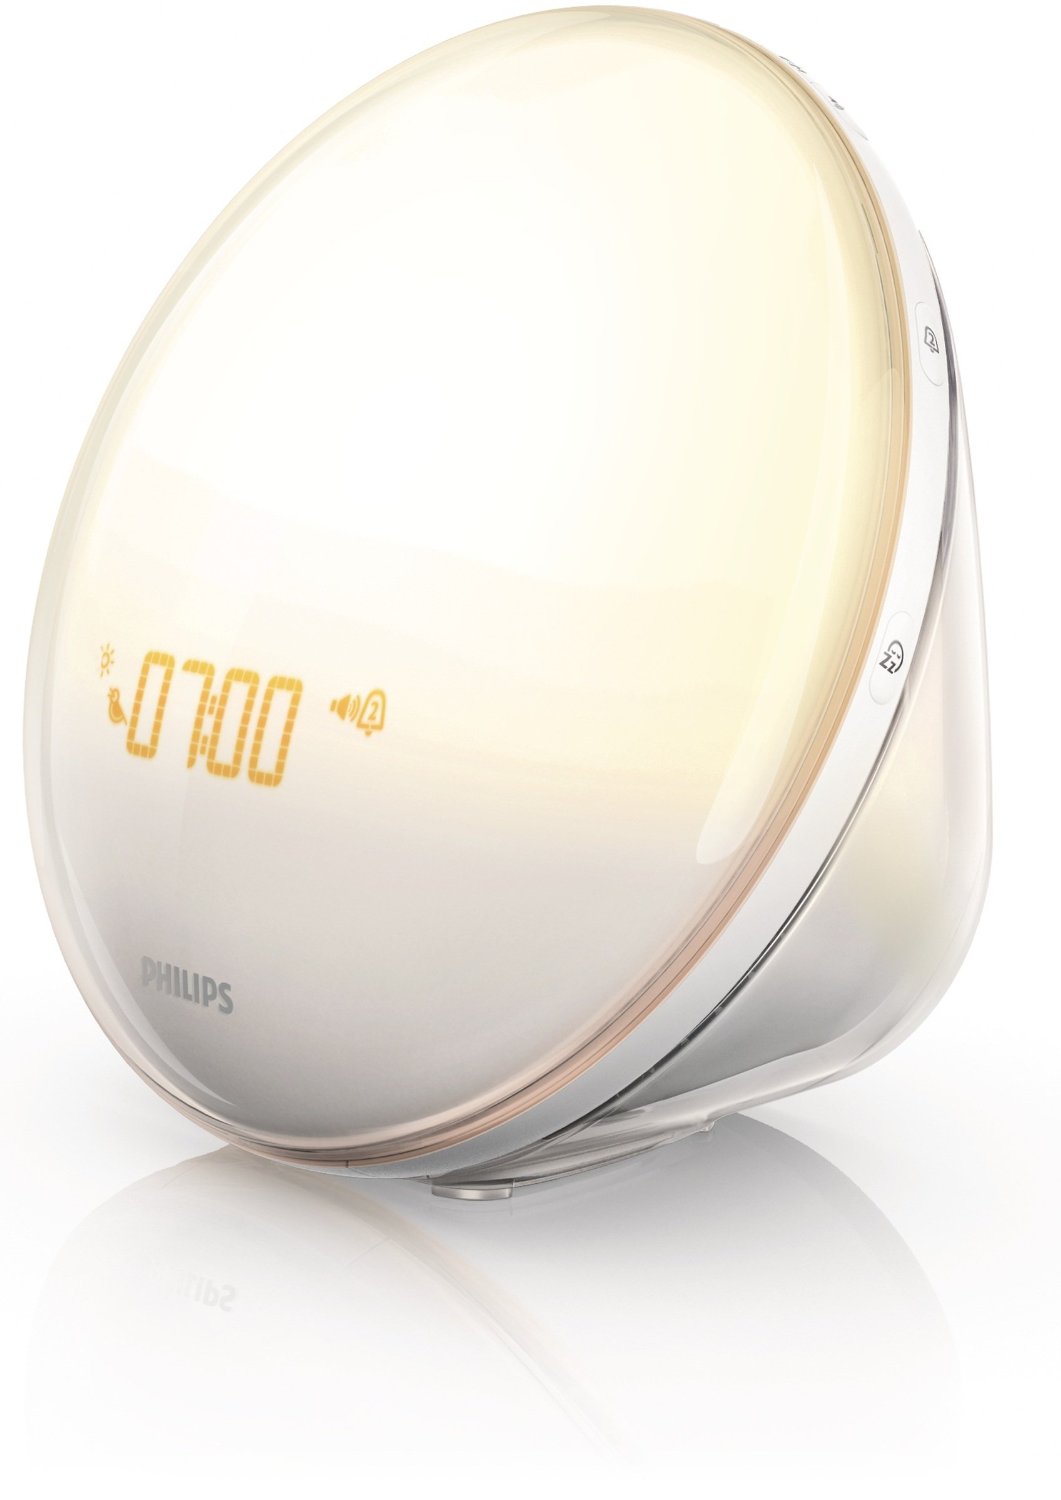 Product review: Philips HF3520 Wake-Up Light